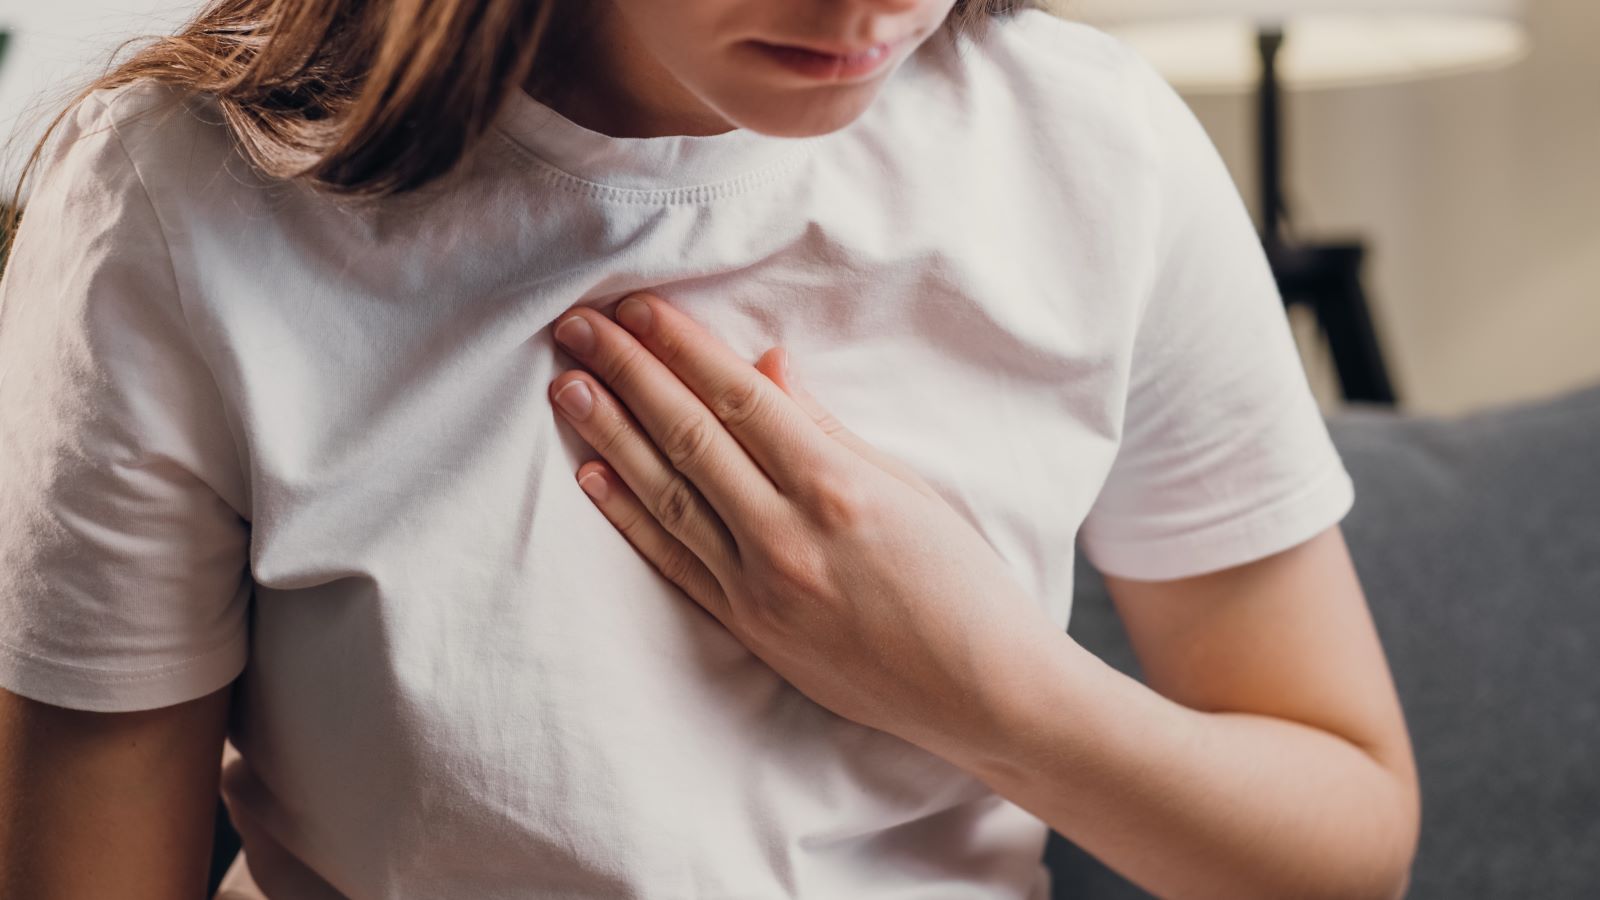 I heartburn medication a good long-term solution? We asked a gastroenterologist for guidance - here's what she has to say.